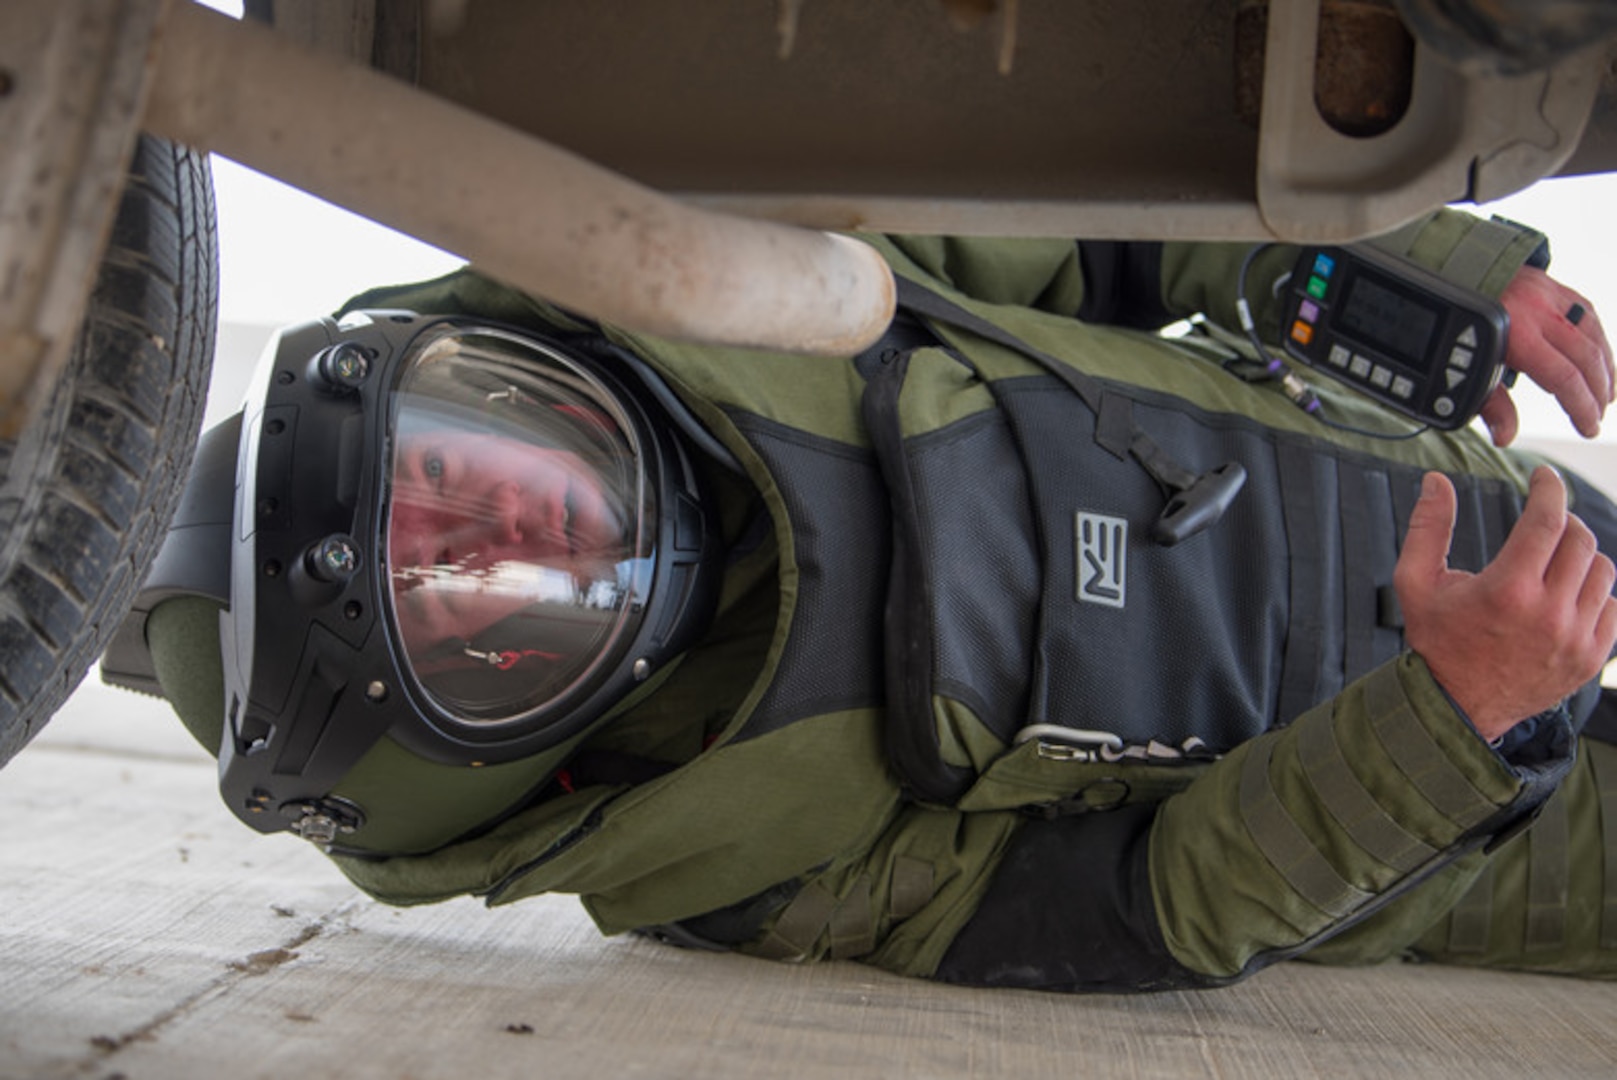 Tech Sgt. John Nelson, an explosive ordnance disposal team leader from the 379th Expeditionary Civil Engineer Squadron, searches a vehicle while wearing an EOD 10 bomb suit during a training scenario at Al Udeid Air Base, Qatar, Feb. 15, 2018.